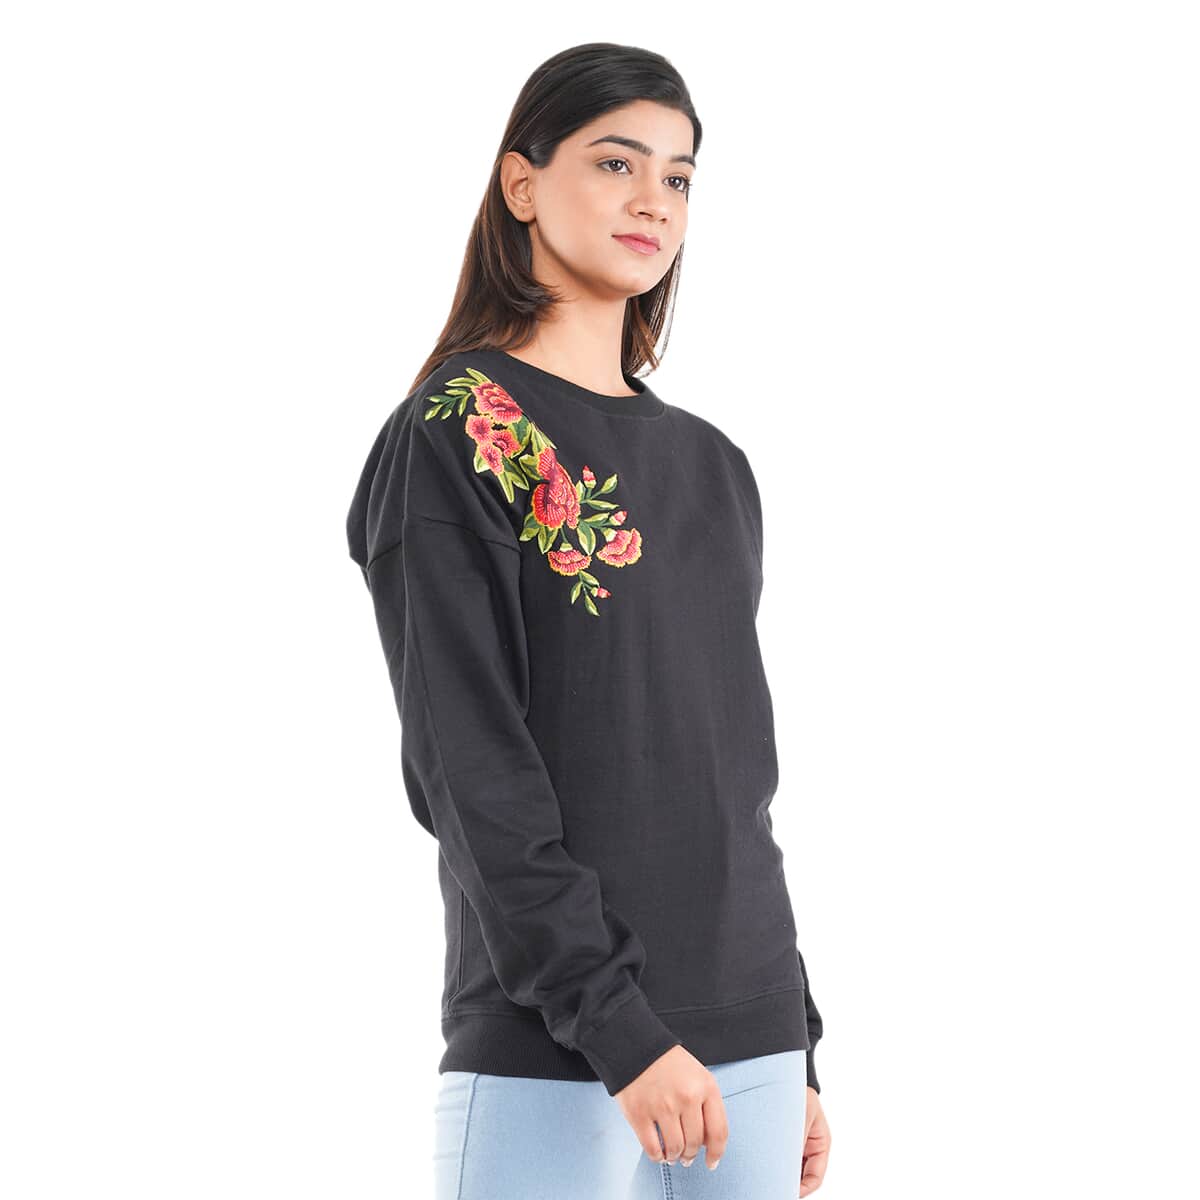 TAMSY 100% Cotton Fleece Knit Sweatshirt with Applique image number 3